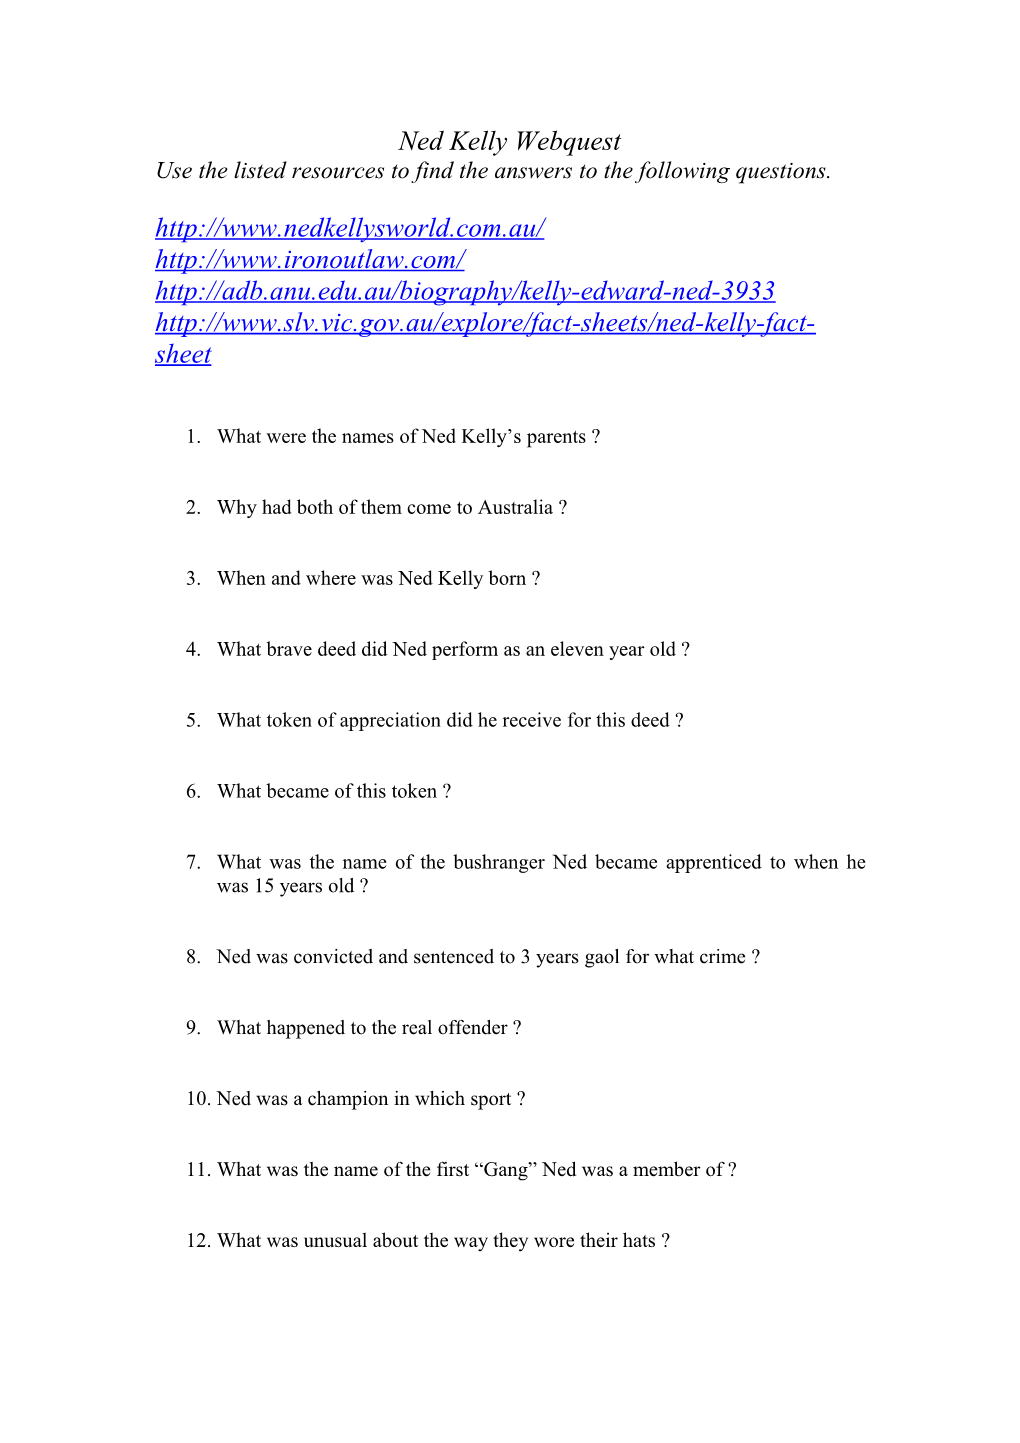 Use the Listed Resources to Find the Answers to the Following Questions